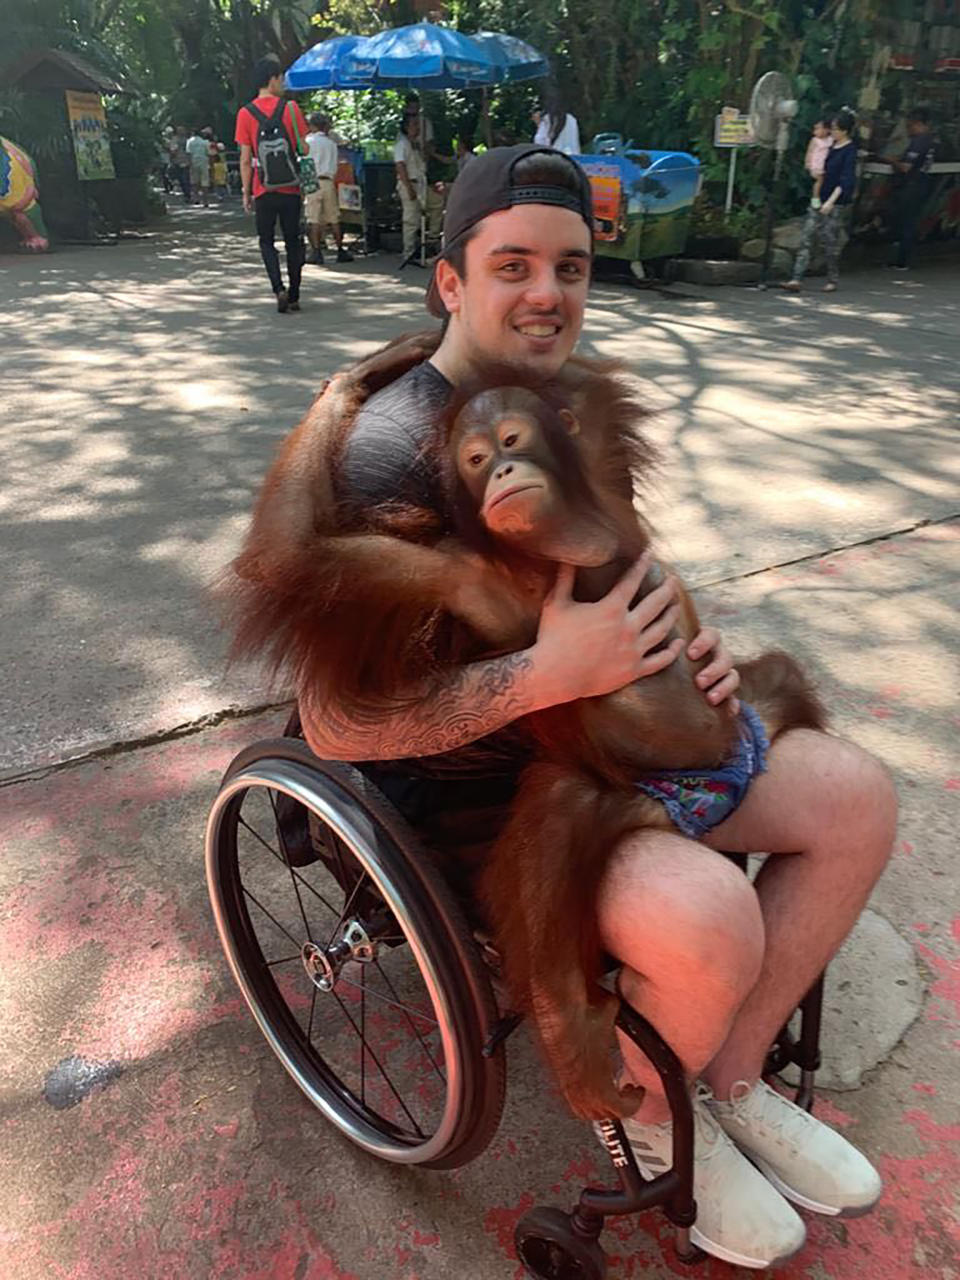 This photo provided by Tom Straschnitzki shows Ryan Straschnitzki as he plays with an orangutan during a visit to the Safari World zoo in Bangkok, Thailand, Sunday, Dec. 1, 2019. Ryan was left paralyzed from the chest down after the bus carrying his Humboldt Broncos hockey team collided with a truck at a rural intersection in Canada 17 months ago. The former hockey prospect went to Thailand to have a stimulator implanted in his back so electrical currents can communicate with his nerves. He took his first small steps and hopes for a better life. (Tom Straschnitzki/ via AP)